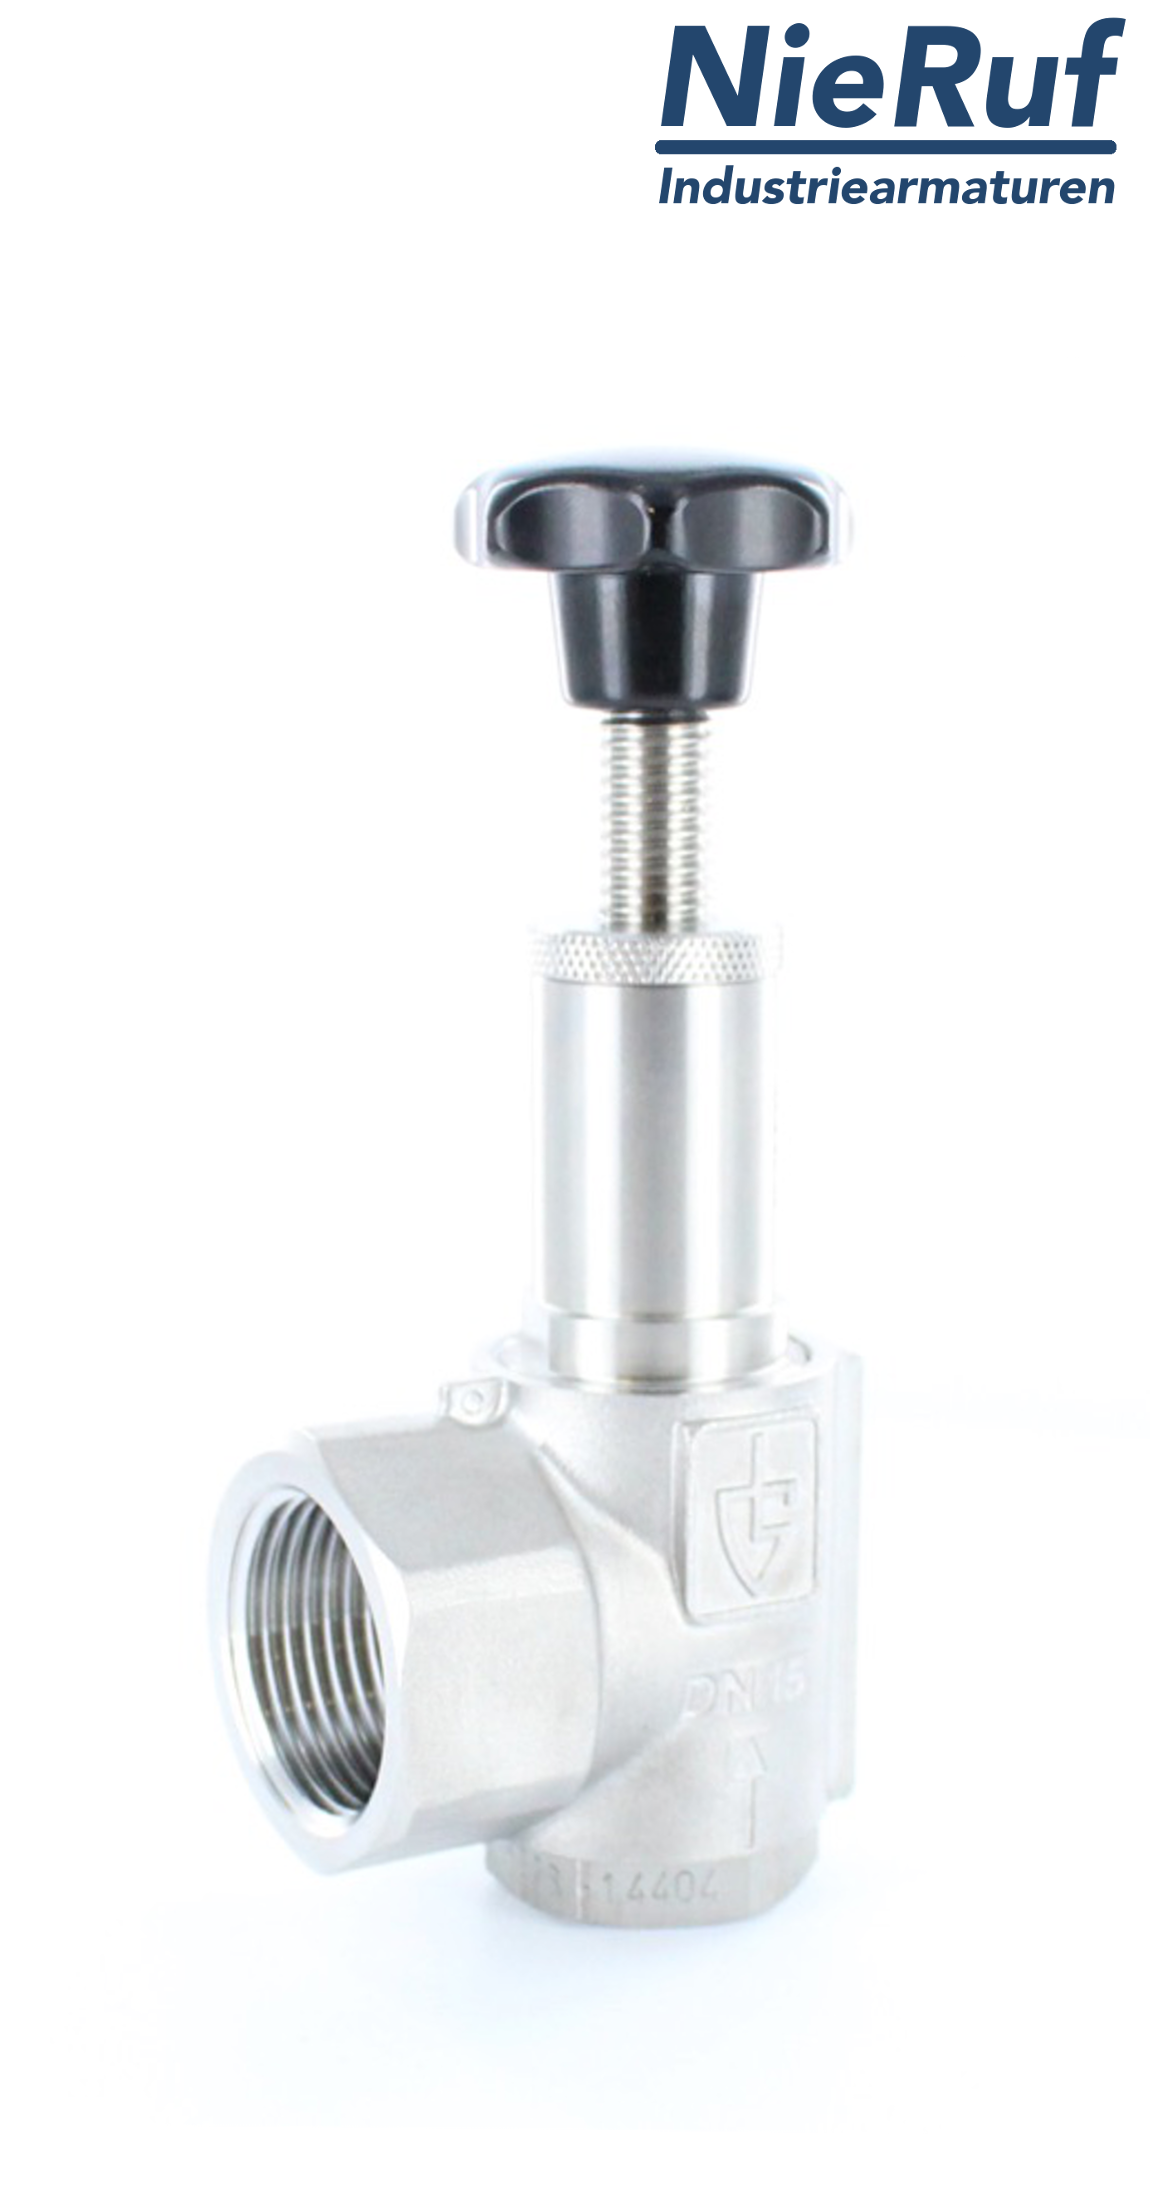 angle-type overflow valve 2" inch male UV15 stainless steel 1,4 - 3,0 bar